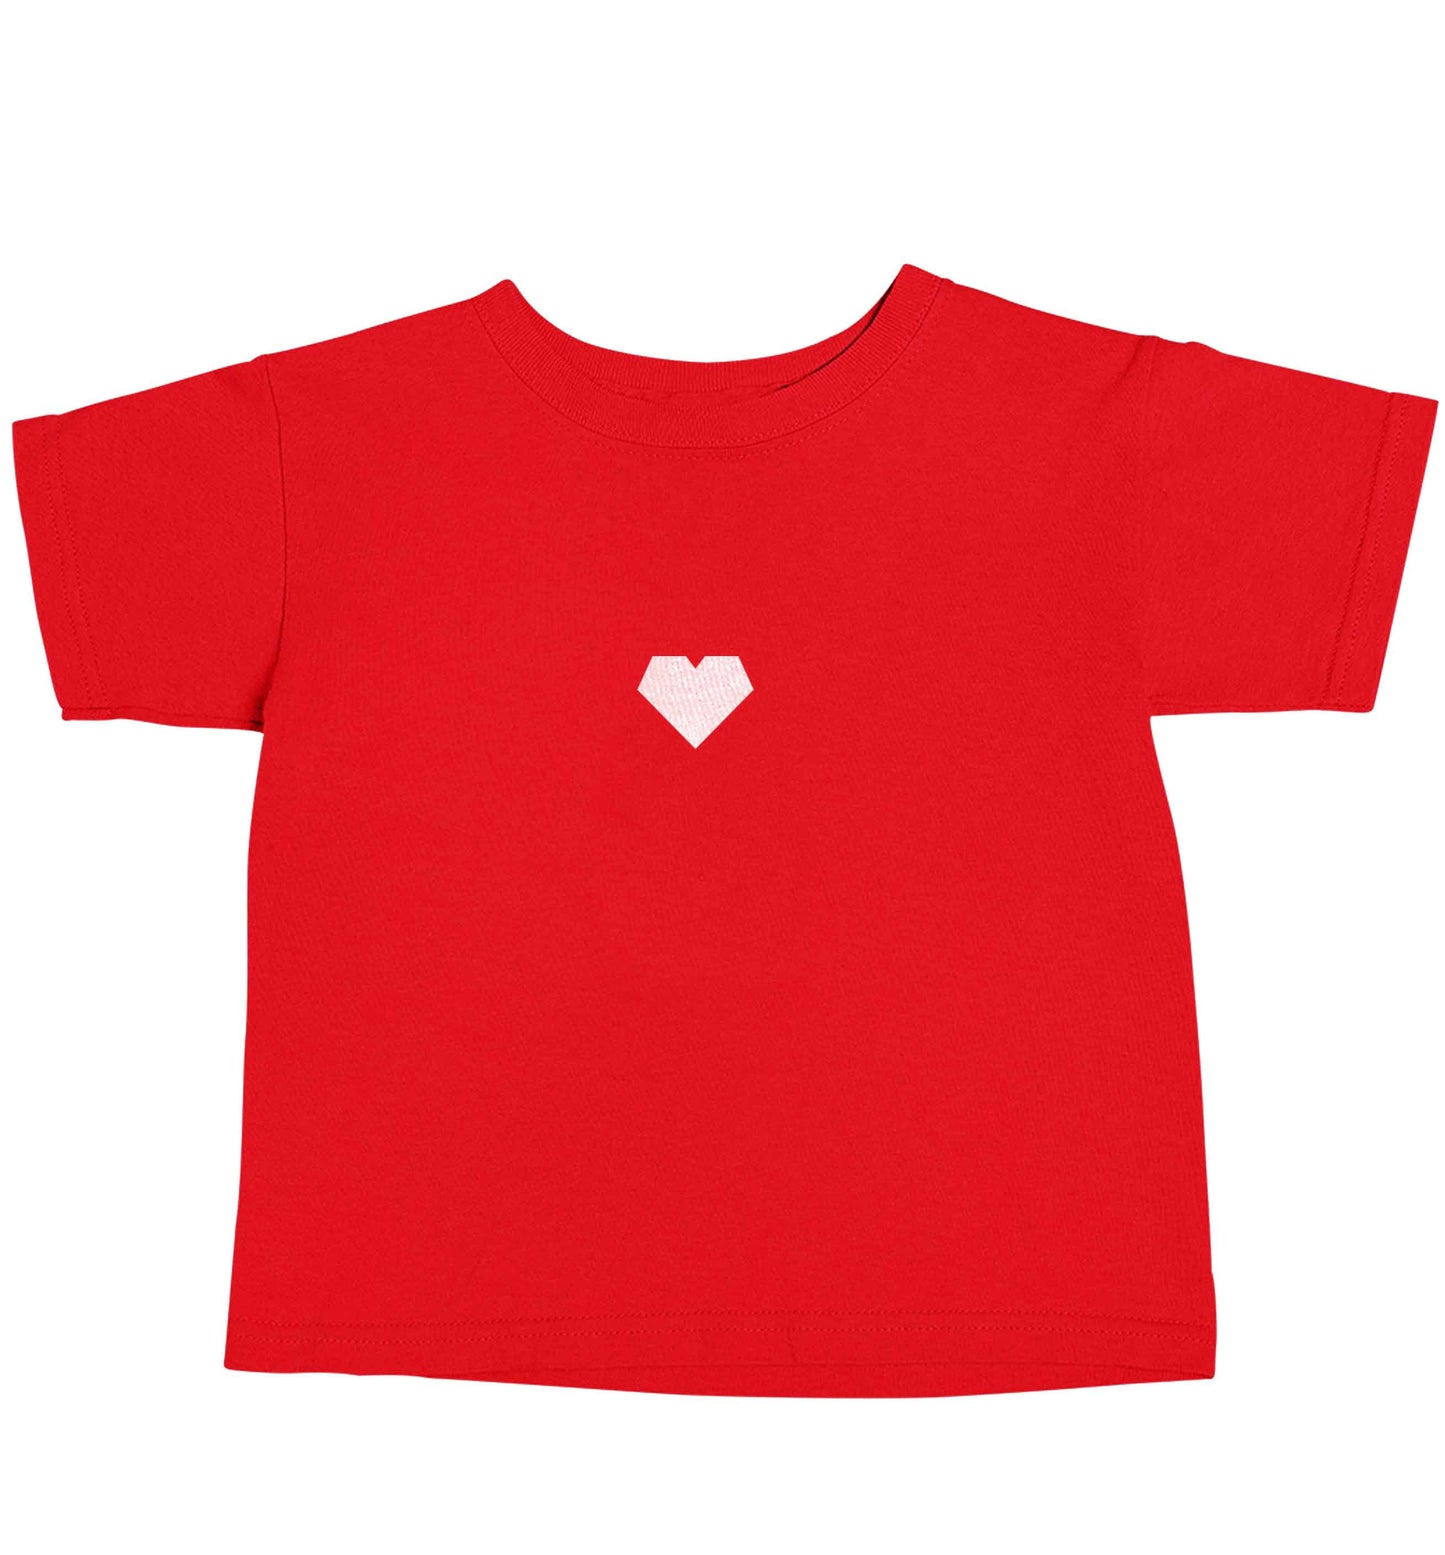 Tiny heart red baby toddler Tshirt 2 Years